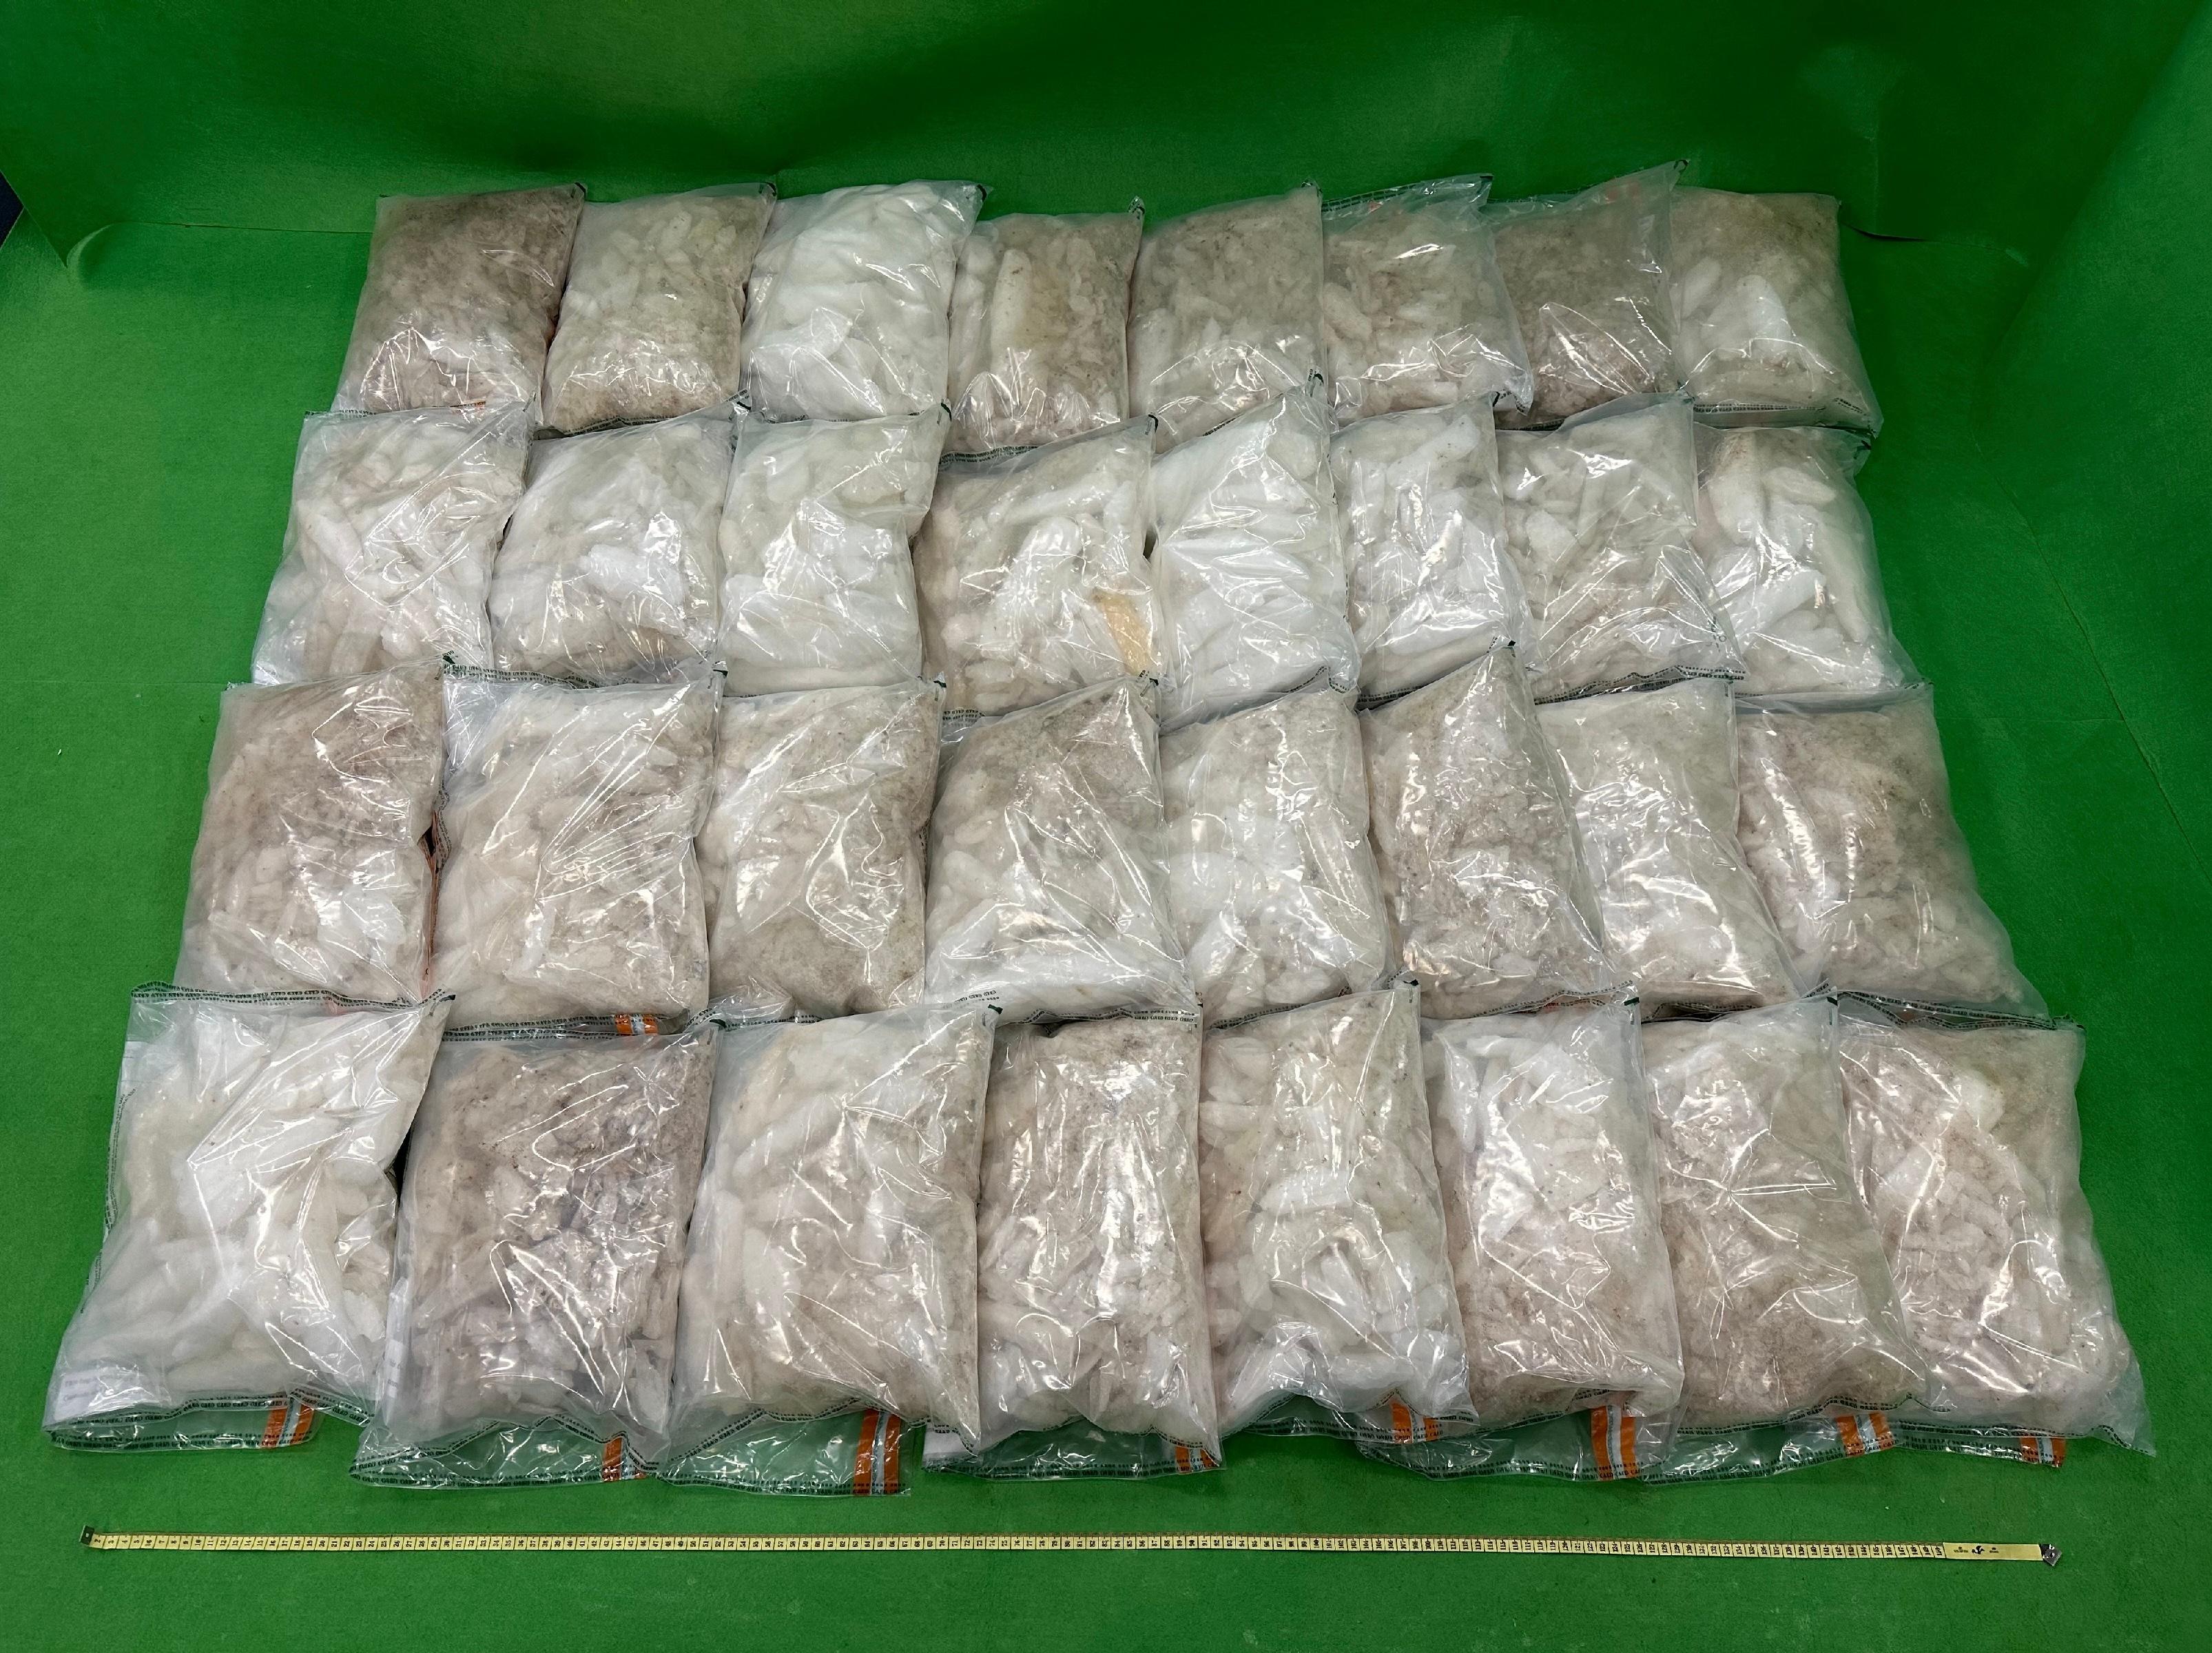 Hong Kong Customs on October 24 detected a large-scale methamphetamine trafficking case at Hong Kong International Airport and seized about 100 kilograms of suspected methamphetamine, with an estimated market value of about $60 million, inside a suspended electromagnetic separator. Photo shows the suspected methamphetamine seized.